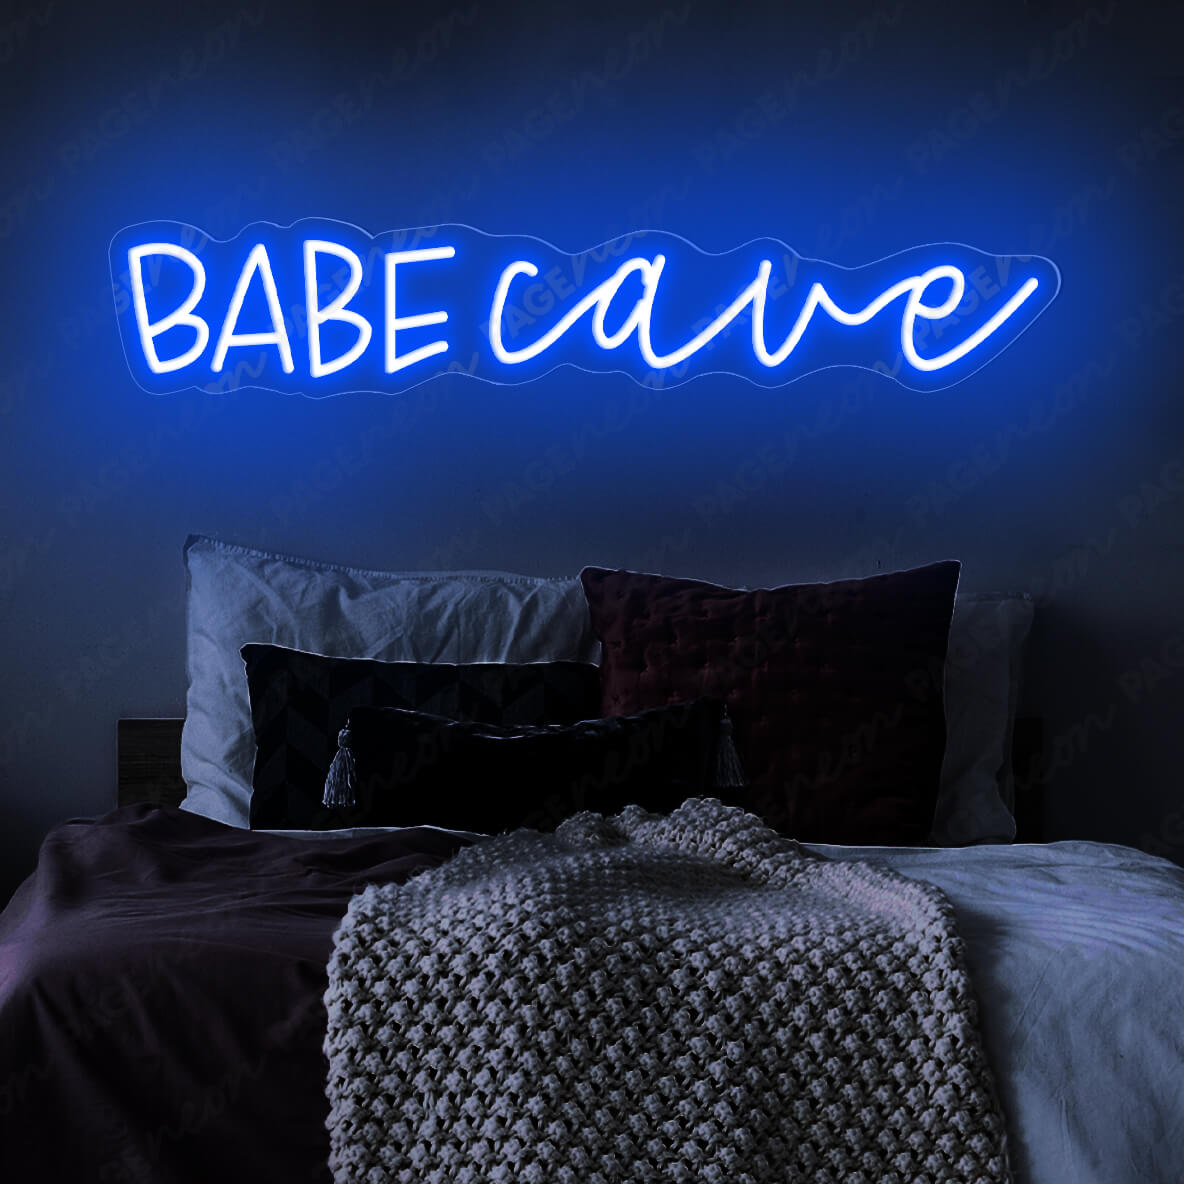 Babe Cave Neon Sign Led Light Blue